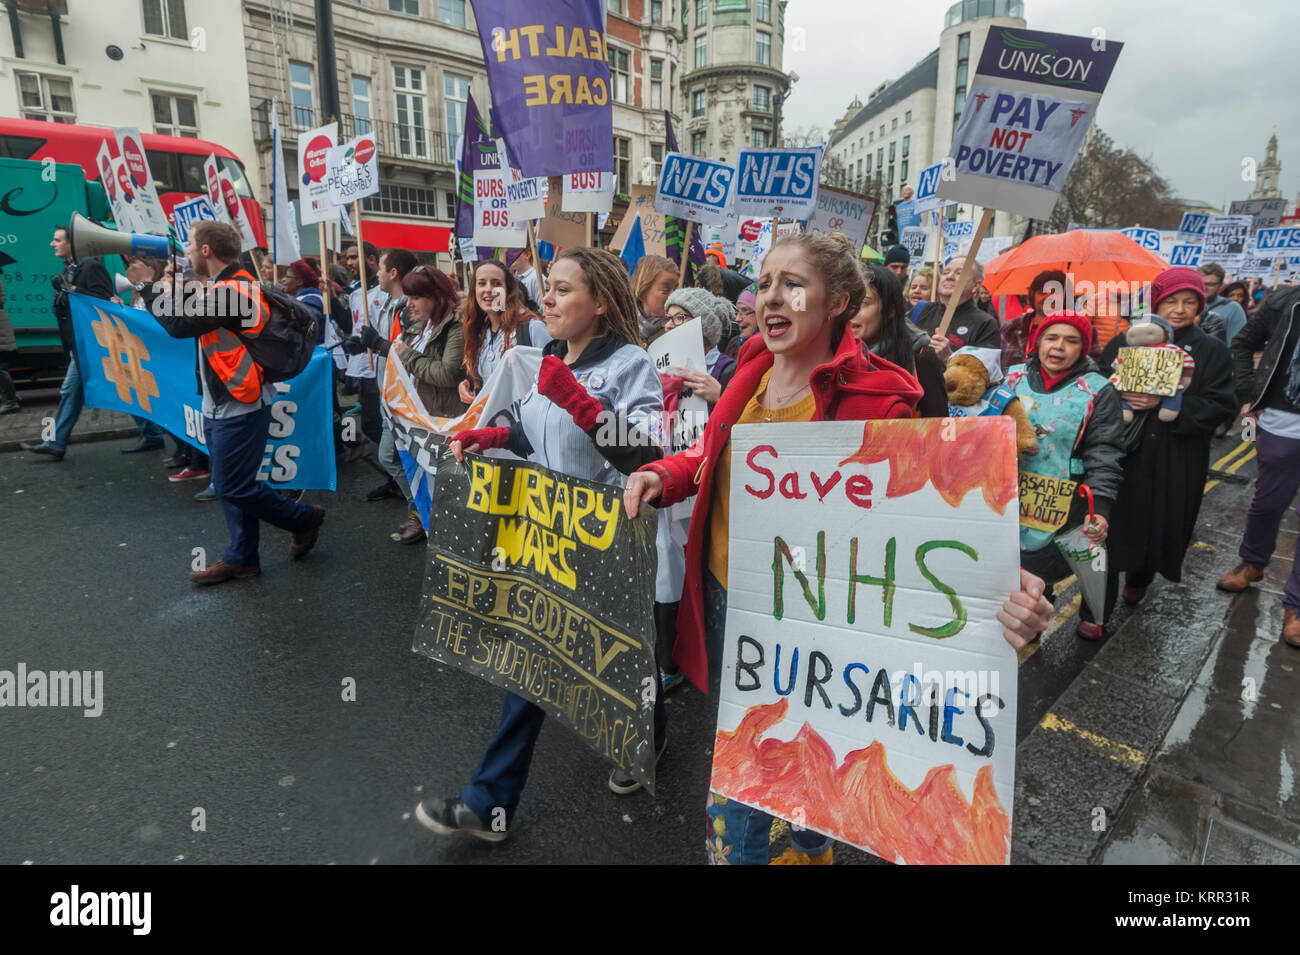 The front of the march to save NHS Student Bursaries goes down the Strand on its way to a rally in Trafalgar Square. Stock Photo